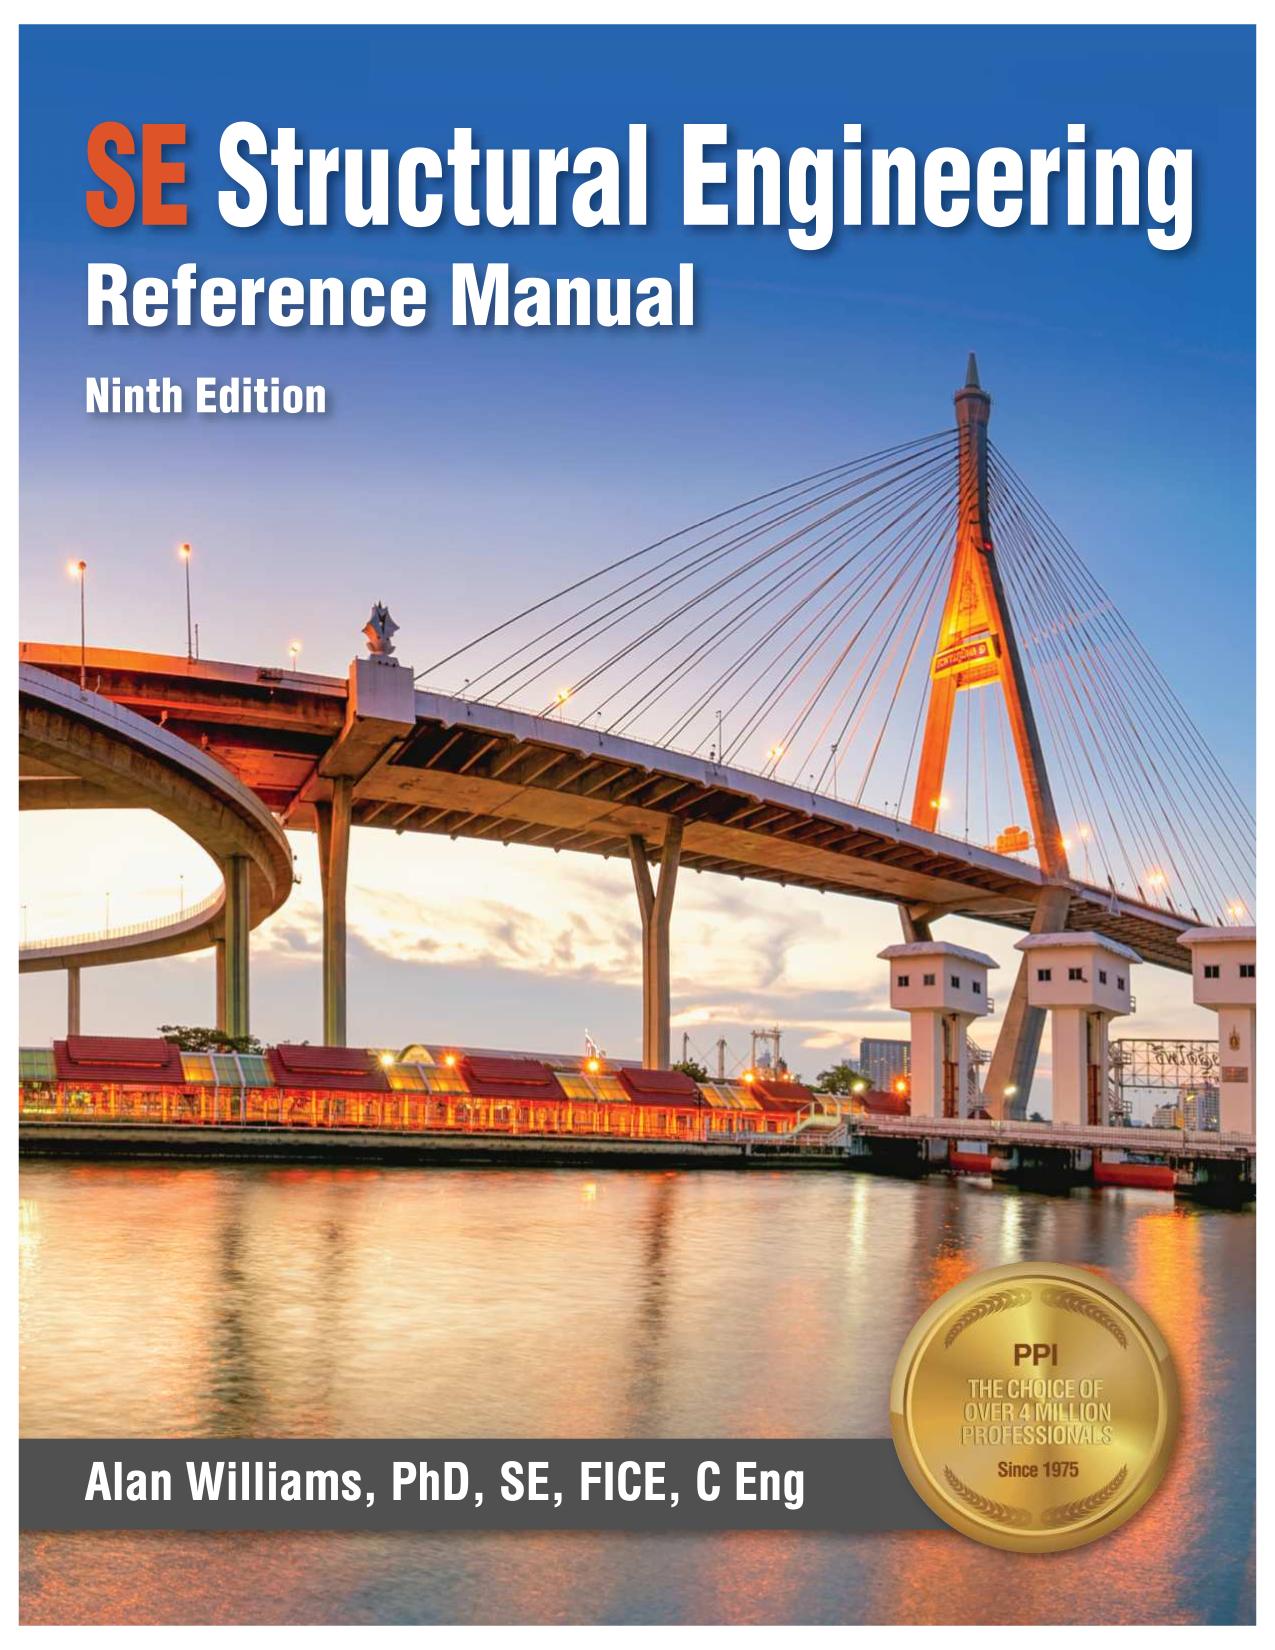 thesis structural engineering pdf